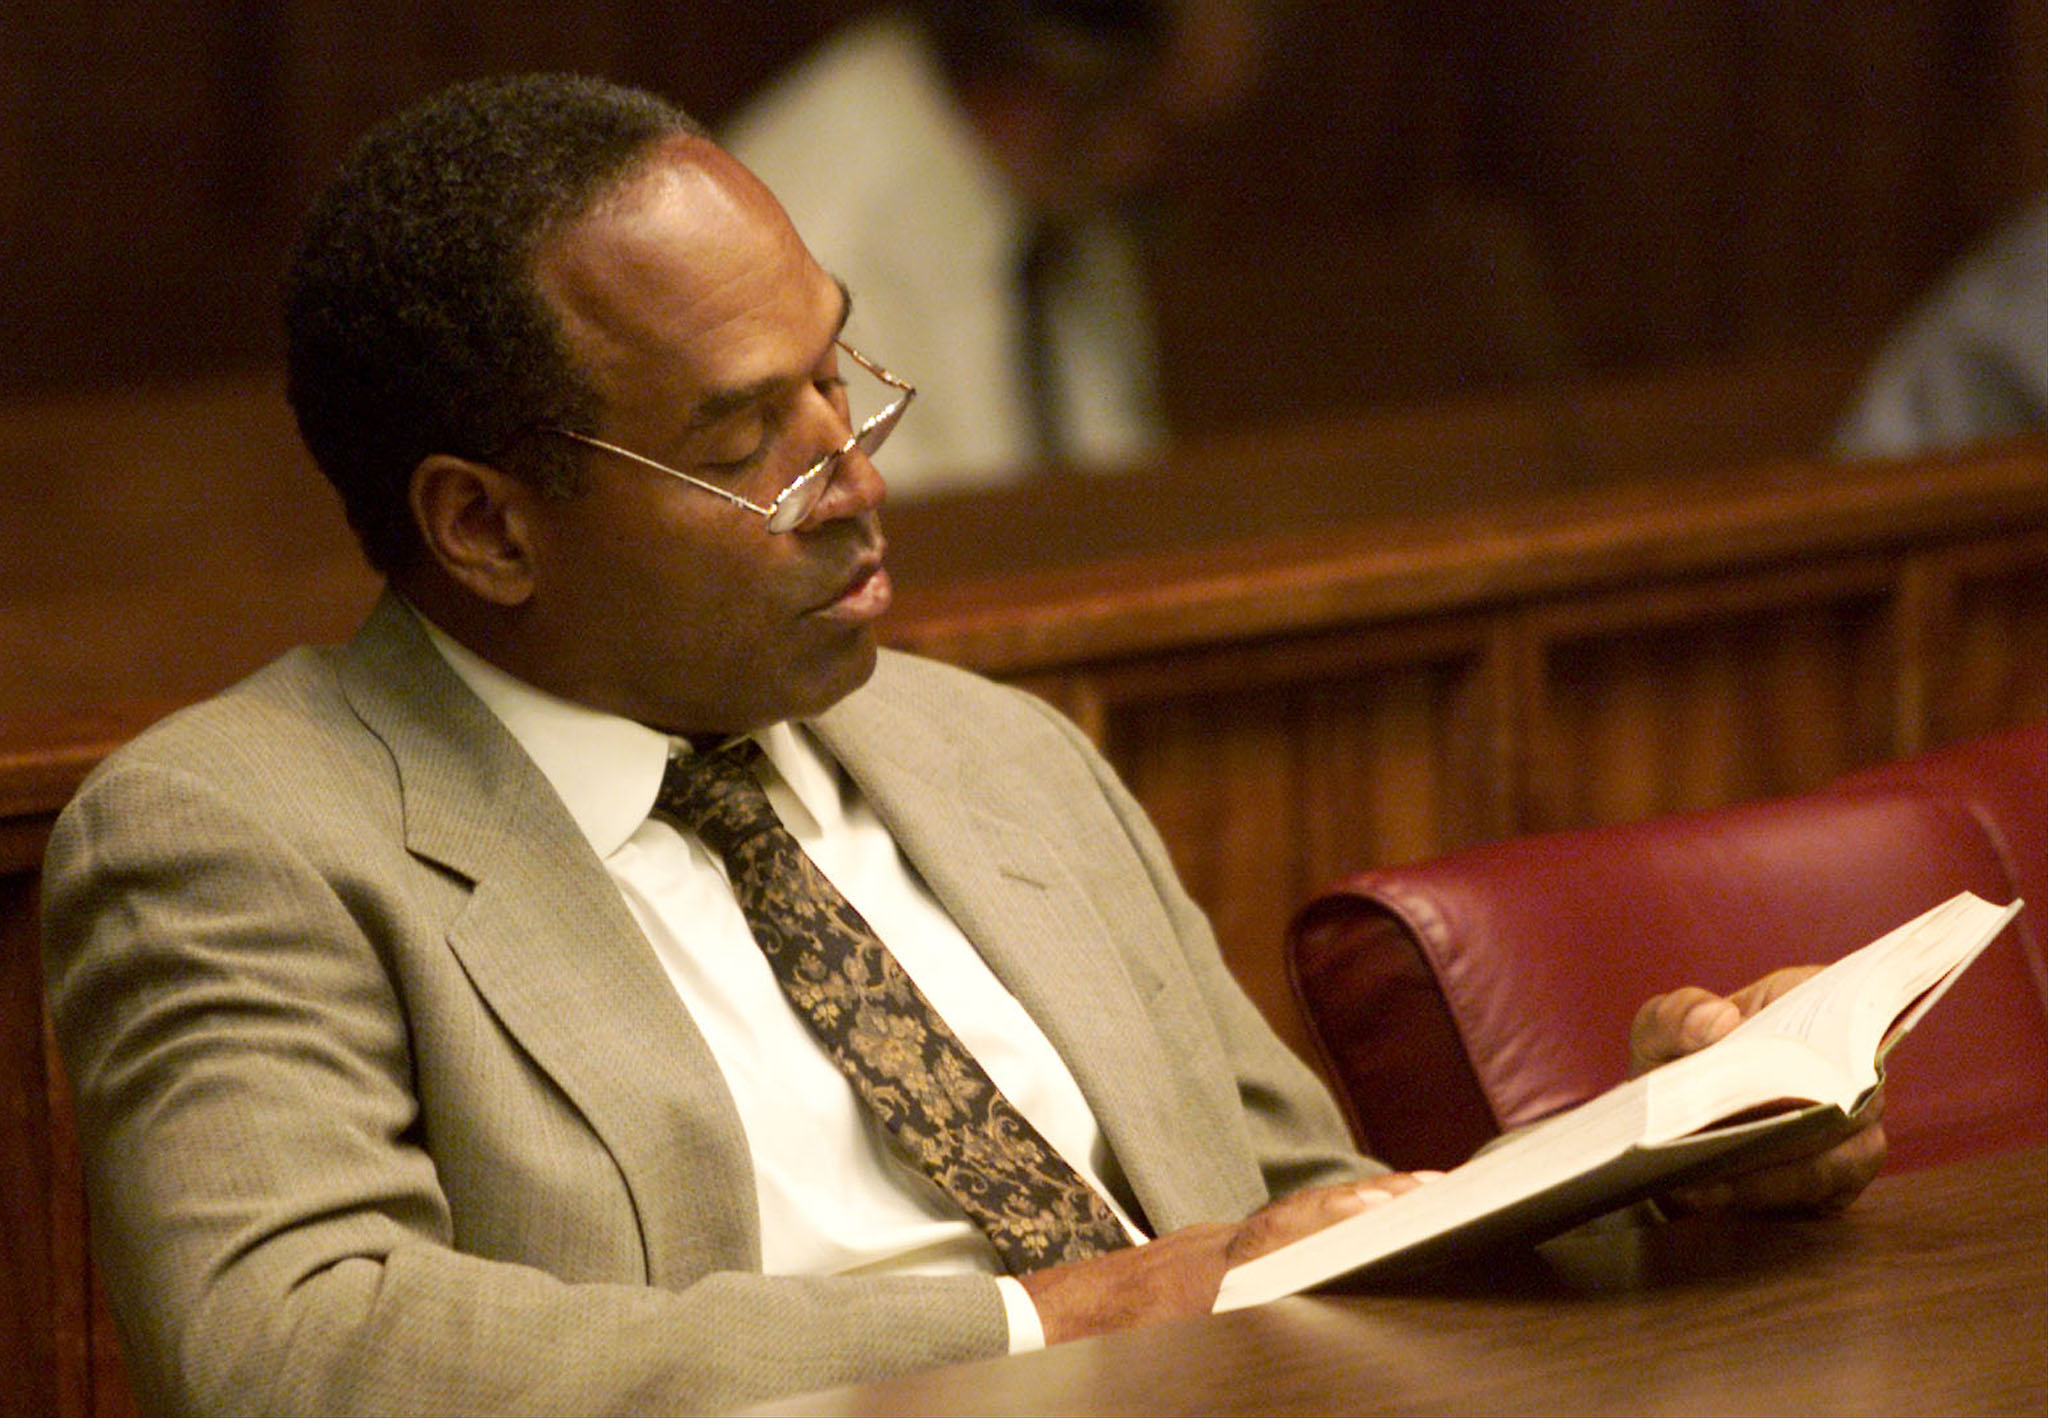 OJ SIMPSON READS A BOOK BEFORE THIRD DAY OF JURY SELECTION.